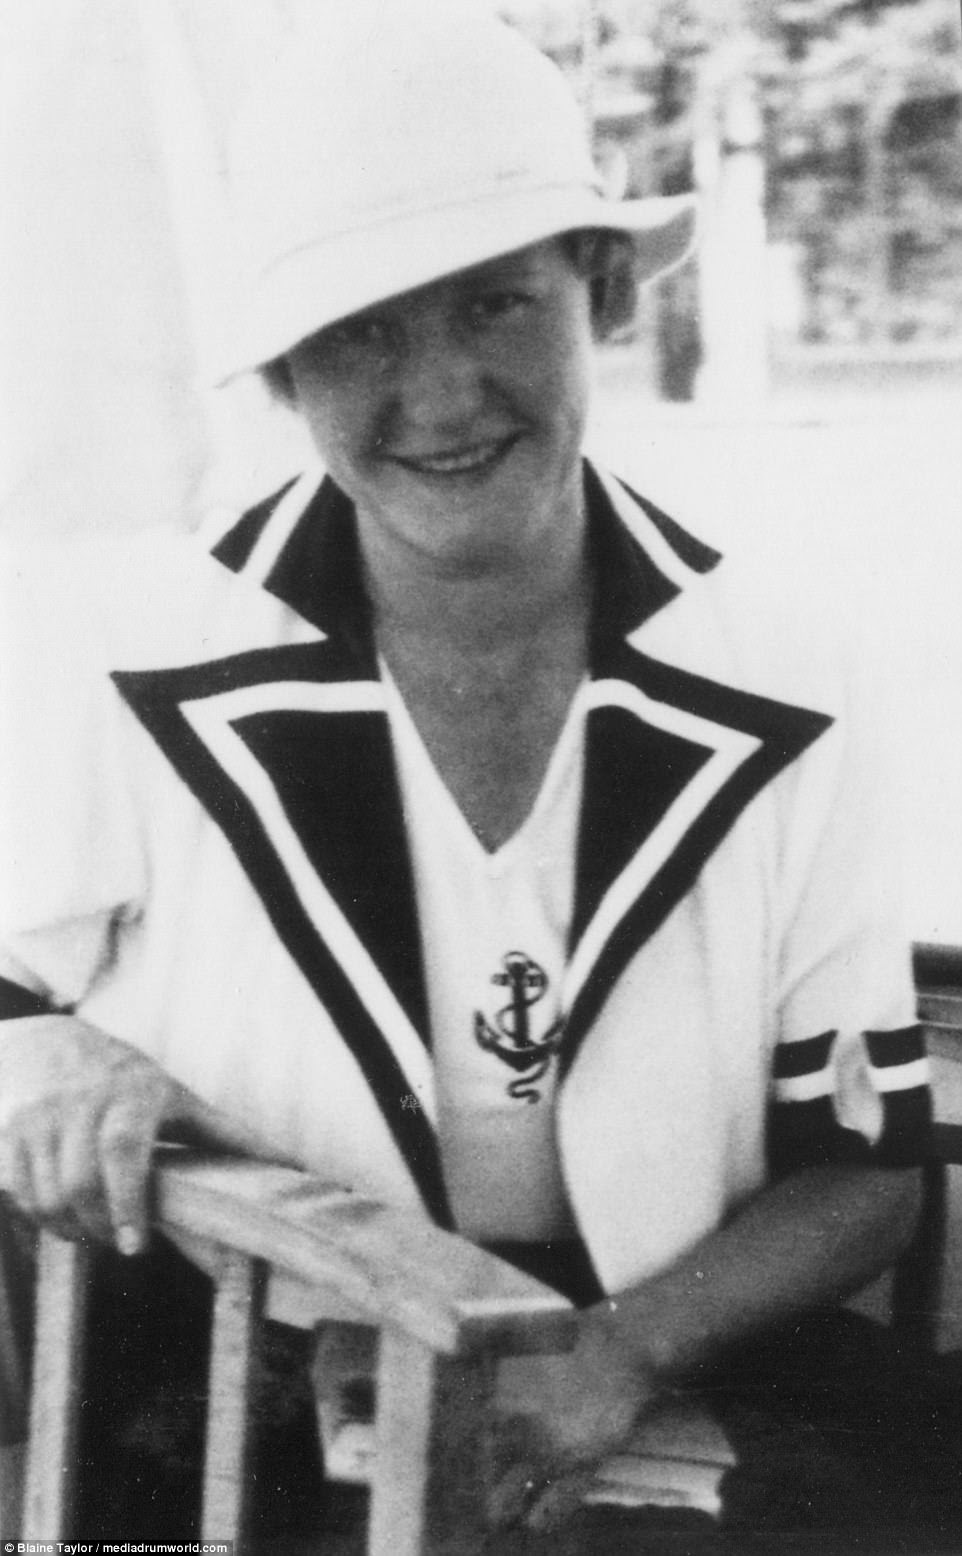 The smile that warmed a war criminal's heart: Mrs Emmy Sonnemann Goering (1893-1973) attired in natty sailor suit and cap. Note the anchor on her blouse at center, taken on 17 June 1936, when she was aged thirty-nine. By all accounts, Emmy was a simple, unaffected woman whom most people liked, even if they found her a bit naïve regarding the harsh world of Nazi politics. Years later, Hitler remembered fondly that she 'was the first woman to congratulate' him upon his appointment as Reich Chancellor by President von Hindenburg on 30 January 1933, the same day that her husband took office. Ever the opportunist, Hermann put her up to it: 'Go and take some flowers to Hitler early tomorrow morning. He will certainly be pleased!' He was. As a stage actress, Emmy well knew what she was doing